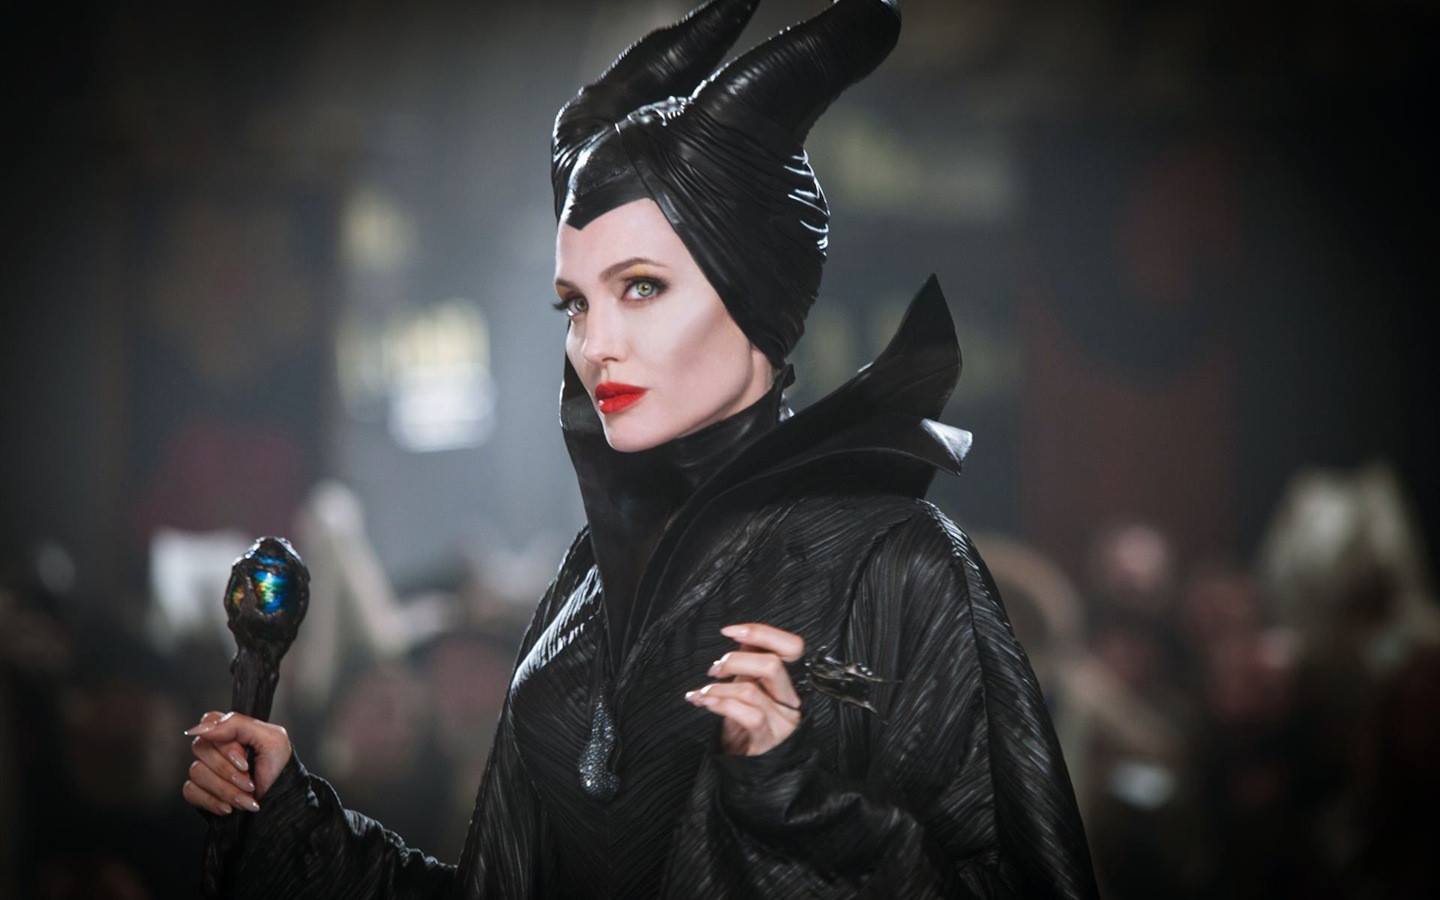 Maleficent 2014 HD movie wallpapers #9 - 1440x900